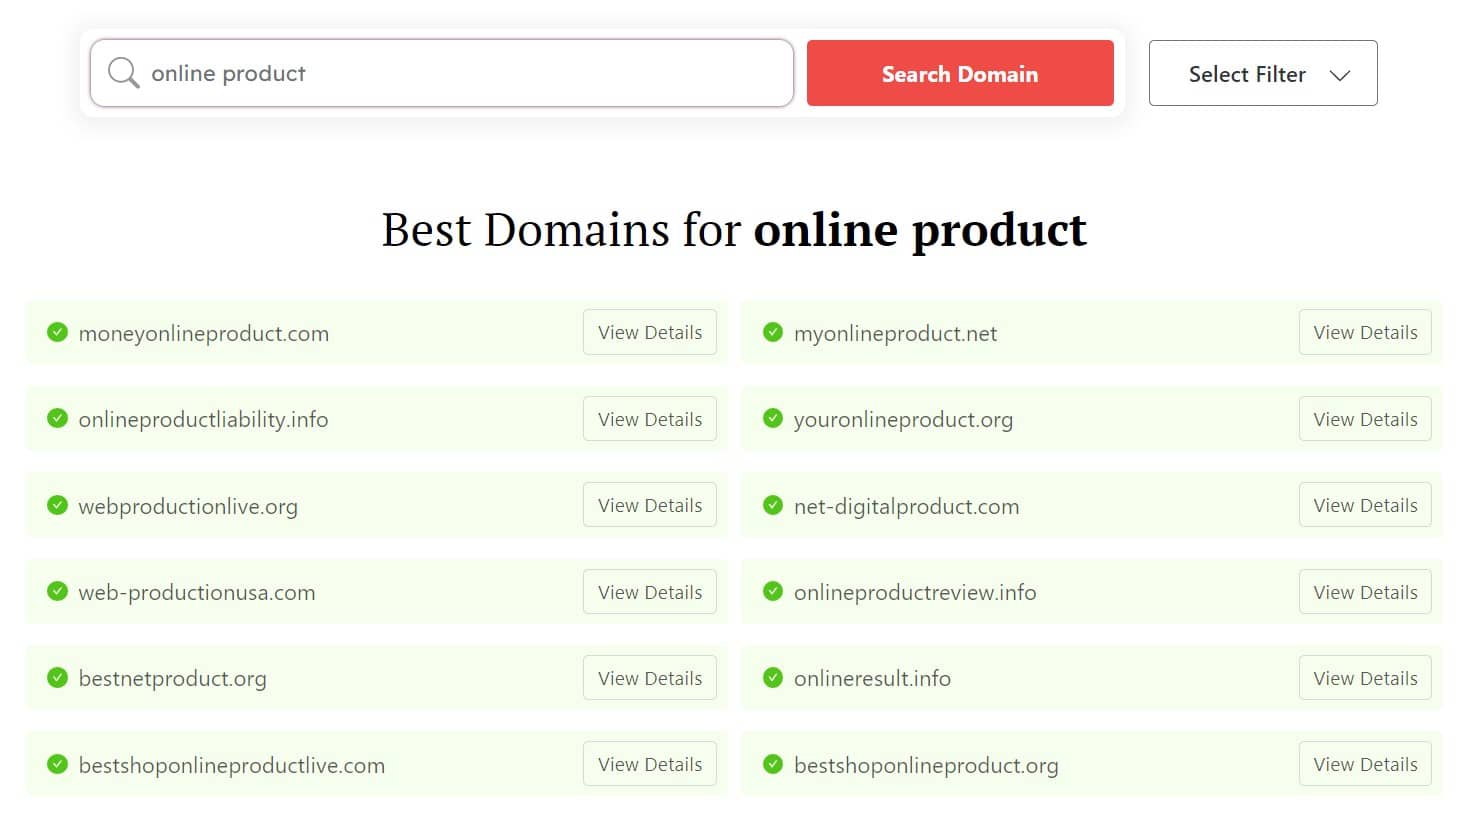 DomainWheel product name generator search results for "online product"